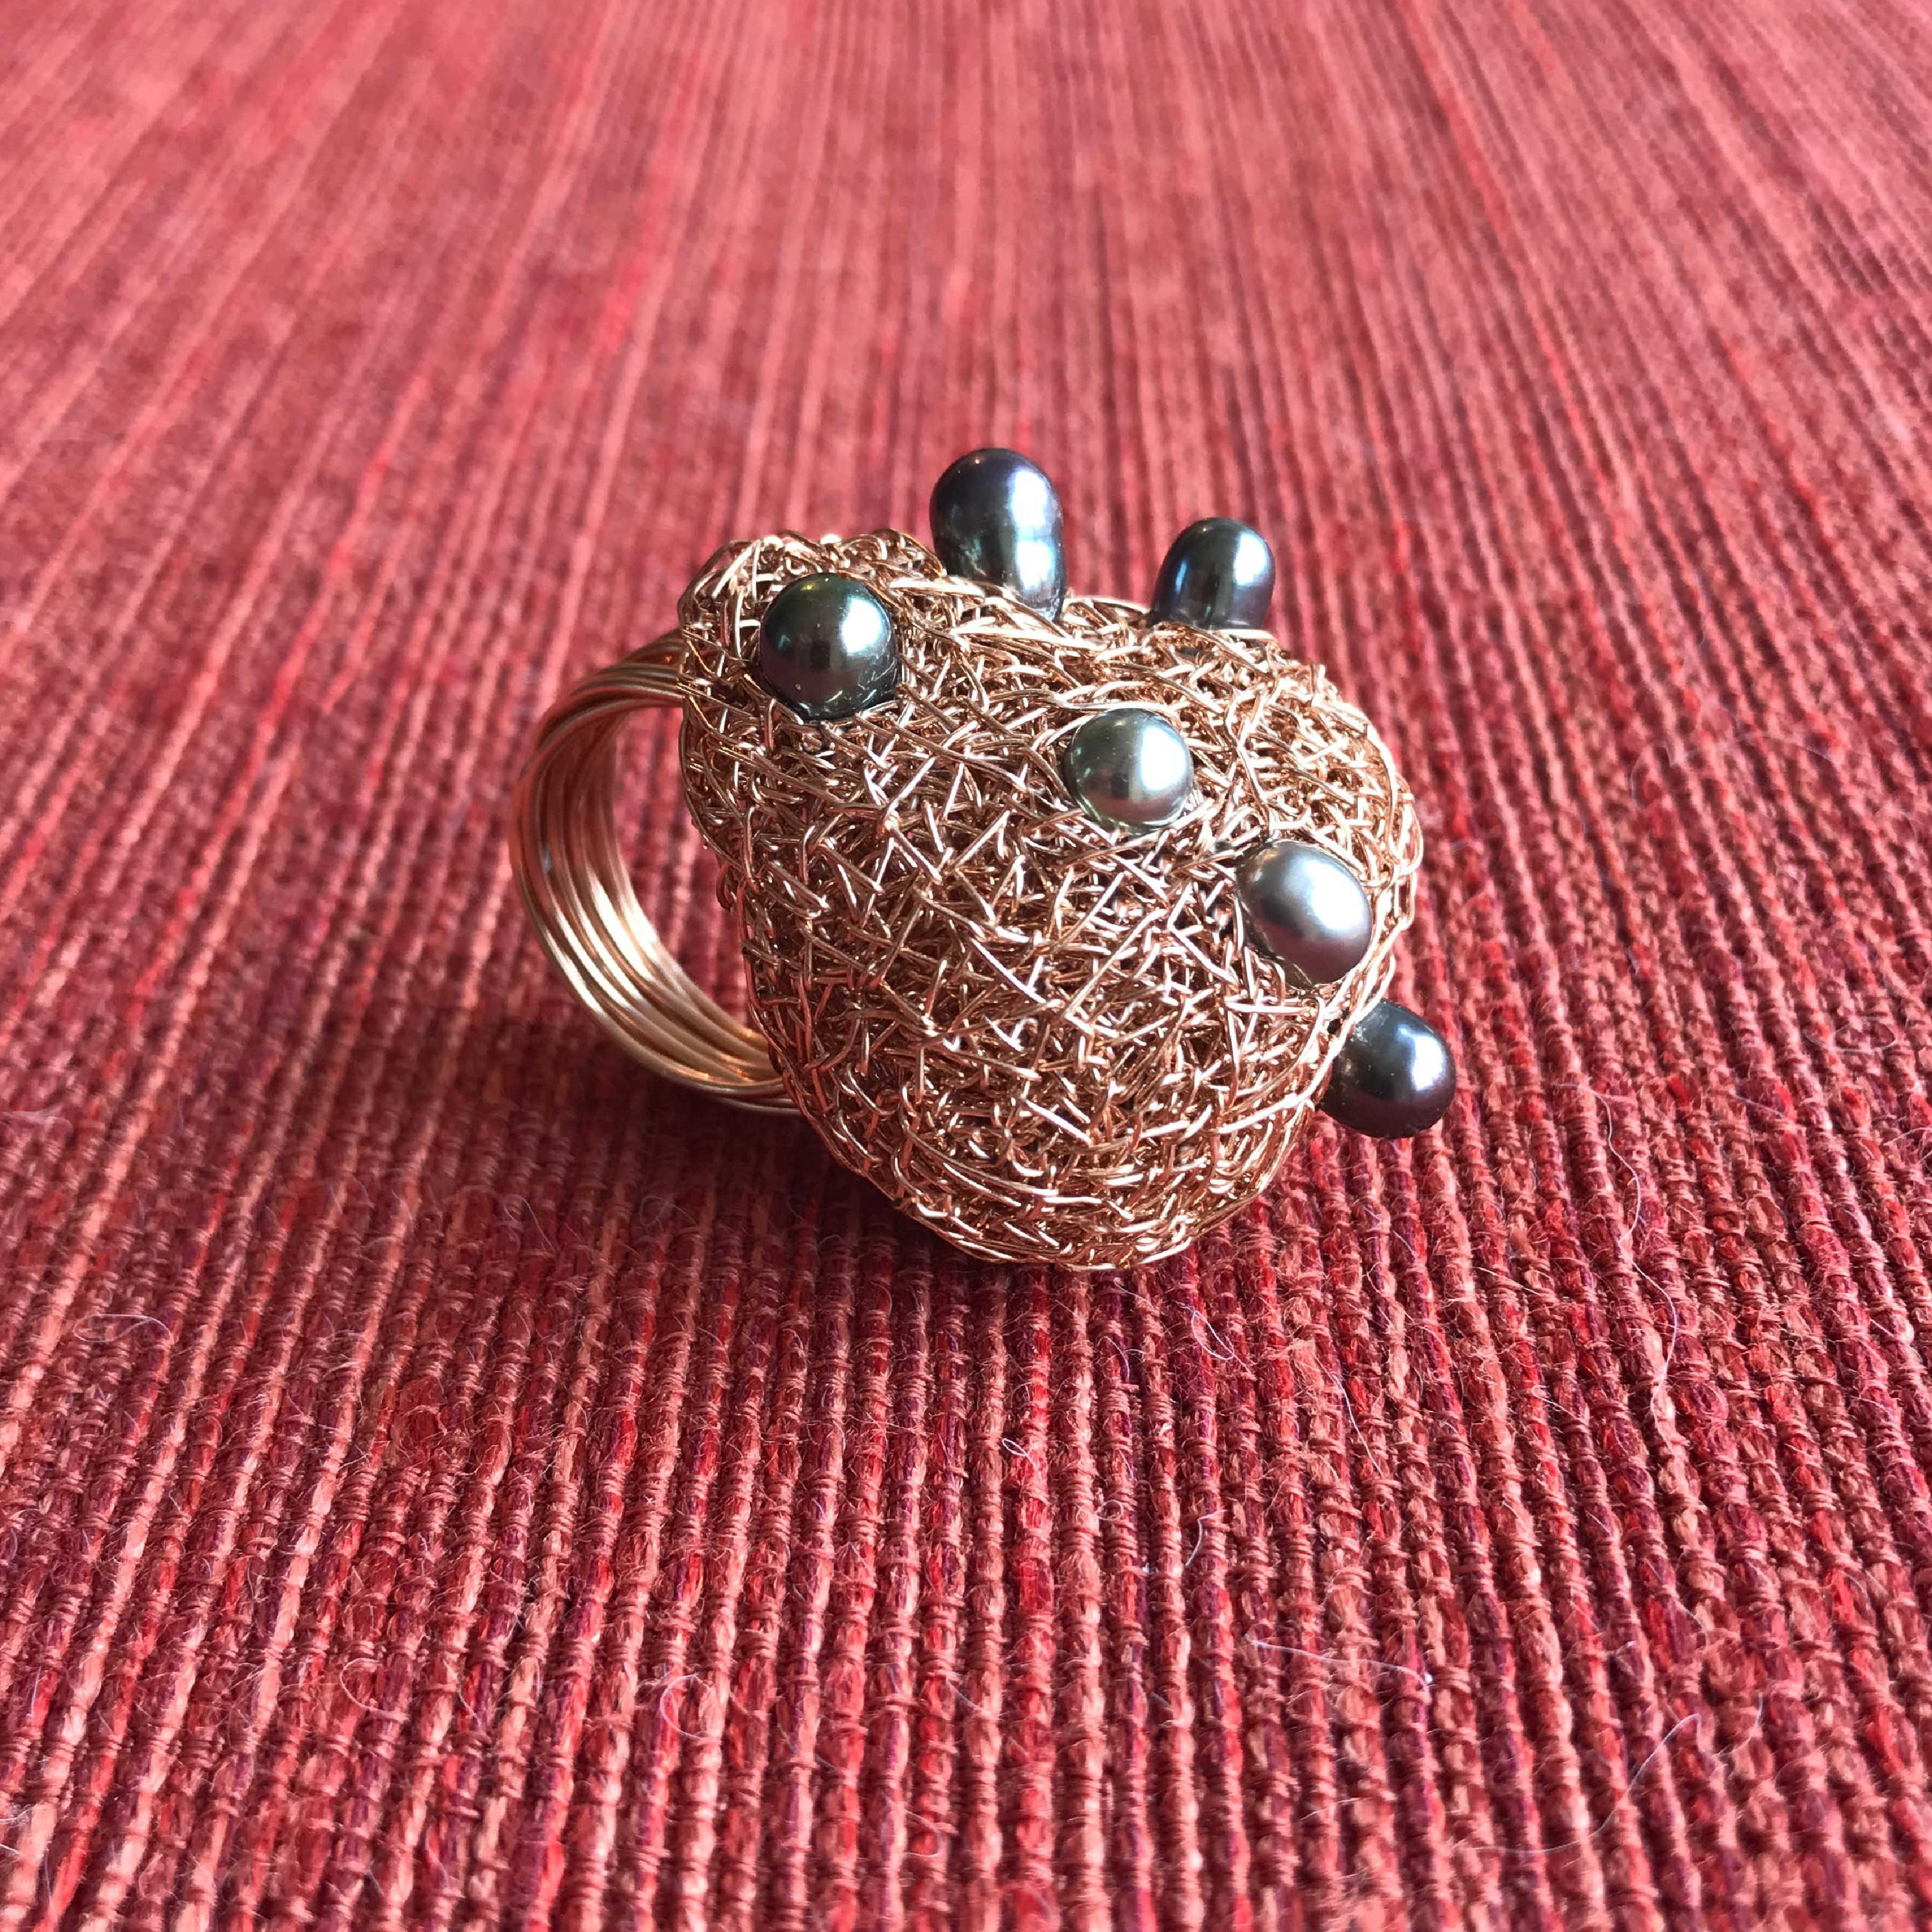 Grey and black Pearls in 14 Karat Rose Gold F Woven Statement Cocktail Ring 7